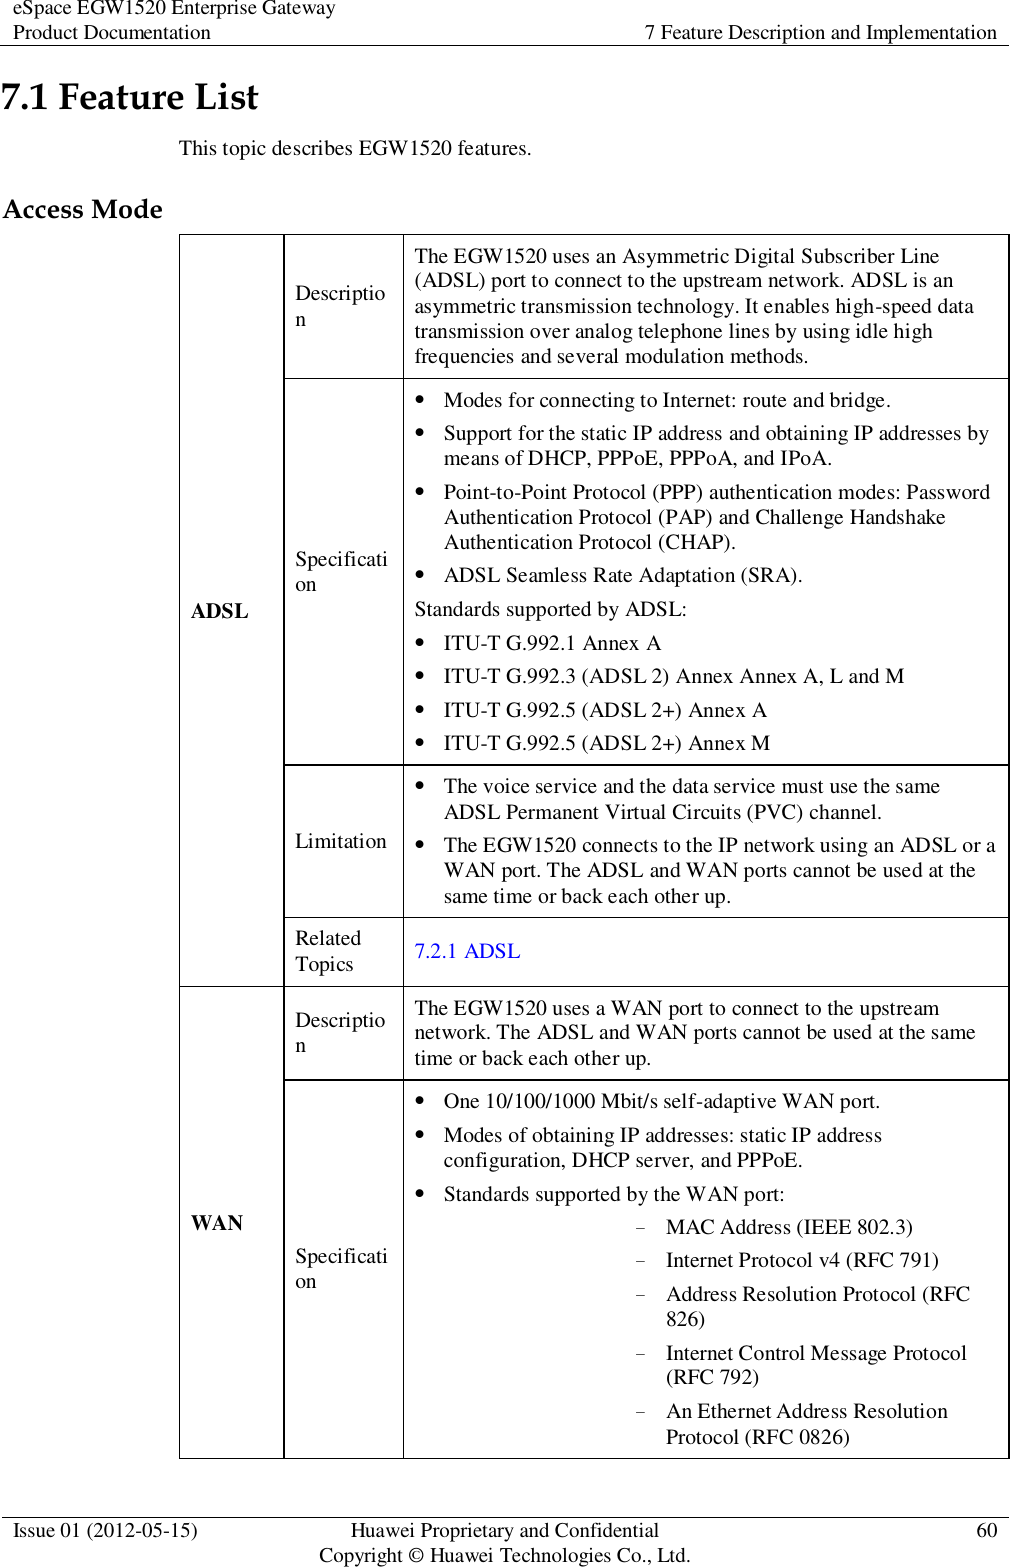 eSpace EGW1520 Enterprise Gateway Product Documentation 7 Feature Description and Implementation  Issue 01 (2012-05-15) Huawei Proprietary and Confidential                                     Copyright © Huawei Technologies Co., Ltd. 60  7.1 Feature List This topic describes EGW1520 features. Access Mode ADSL Description The EGW1520 uses an Asymmetric Digital Subscriber Line (ADSL) port to connect to the upstream network. ADSL is an asymmetric transmission technology. It enables high-speed data transmission over analog telephone lines by using idle high frequencies and several modulation methods. Specification  Modes for connecting to Internet: route and bridge.  Support for the static IP address and obtaining IP addresses by means of DHCP, PPPoE, PPPoA, and IPoA.  Point-to-Point Protocol (PPP) authentication modes: Password Authentication Protocol (PAP) and Challenge Handshake Authentication Protocol (CHAP).  ADSL Seamless Rate Adaptation (SRA). Standards supported by ADSL:  ITU-T G.992.1 Annex A  ITU-T G.992.3 (ADSL 2) Annex Annex A, L and M  ITU-T G.992.5 (ADSL 2+) Annex A  ITU-T G.992.5 (ADSL 2+) Annex M Limitation  The voice service and the data service must use the same ADSL Permanent Virtual Circuits (PVC) channel.  The EGW1520 connects to the IP network using an ADSL or a WAN port. The ADSL and WAN ports cannot be used at the same time or back each other up. Related Topics 7.2.1 ADSL WAN Description The EGW1520 uses a WAN port to connect to the upstream network. The ADSL and WAN ports cannot be used at the same time or back each other up. Specification  One 10/100/1000 Mbit/s self-adaptive WAN port.  Modes of obtaining IP addresses: static IP address configuration, DHCP server, and PPPoE.  Standards supported by the WAN port: − MAC Address (IEEE 802.3) − Internet Protocol v4 (RFC 791) − Address Resolution Protocol (RFC 826) − Internet Control Message Protocol (RFC 792) − An Ethernet Address Resolution Protocol (RFC 0826) 